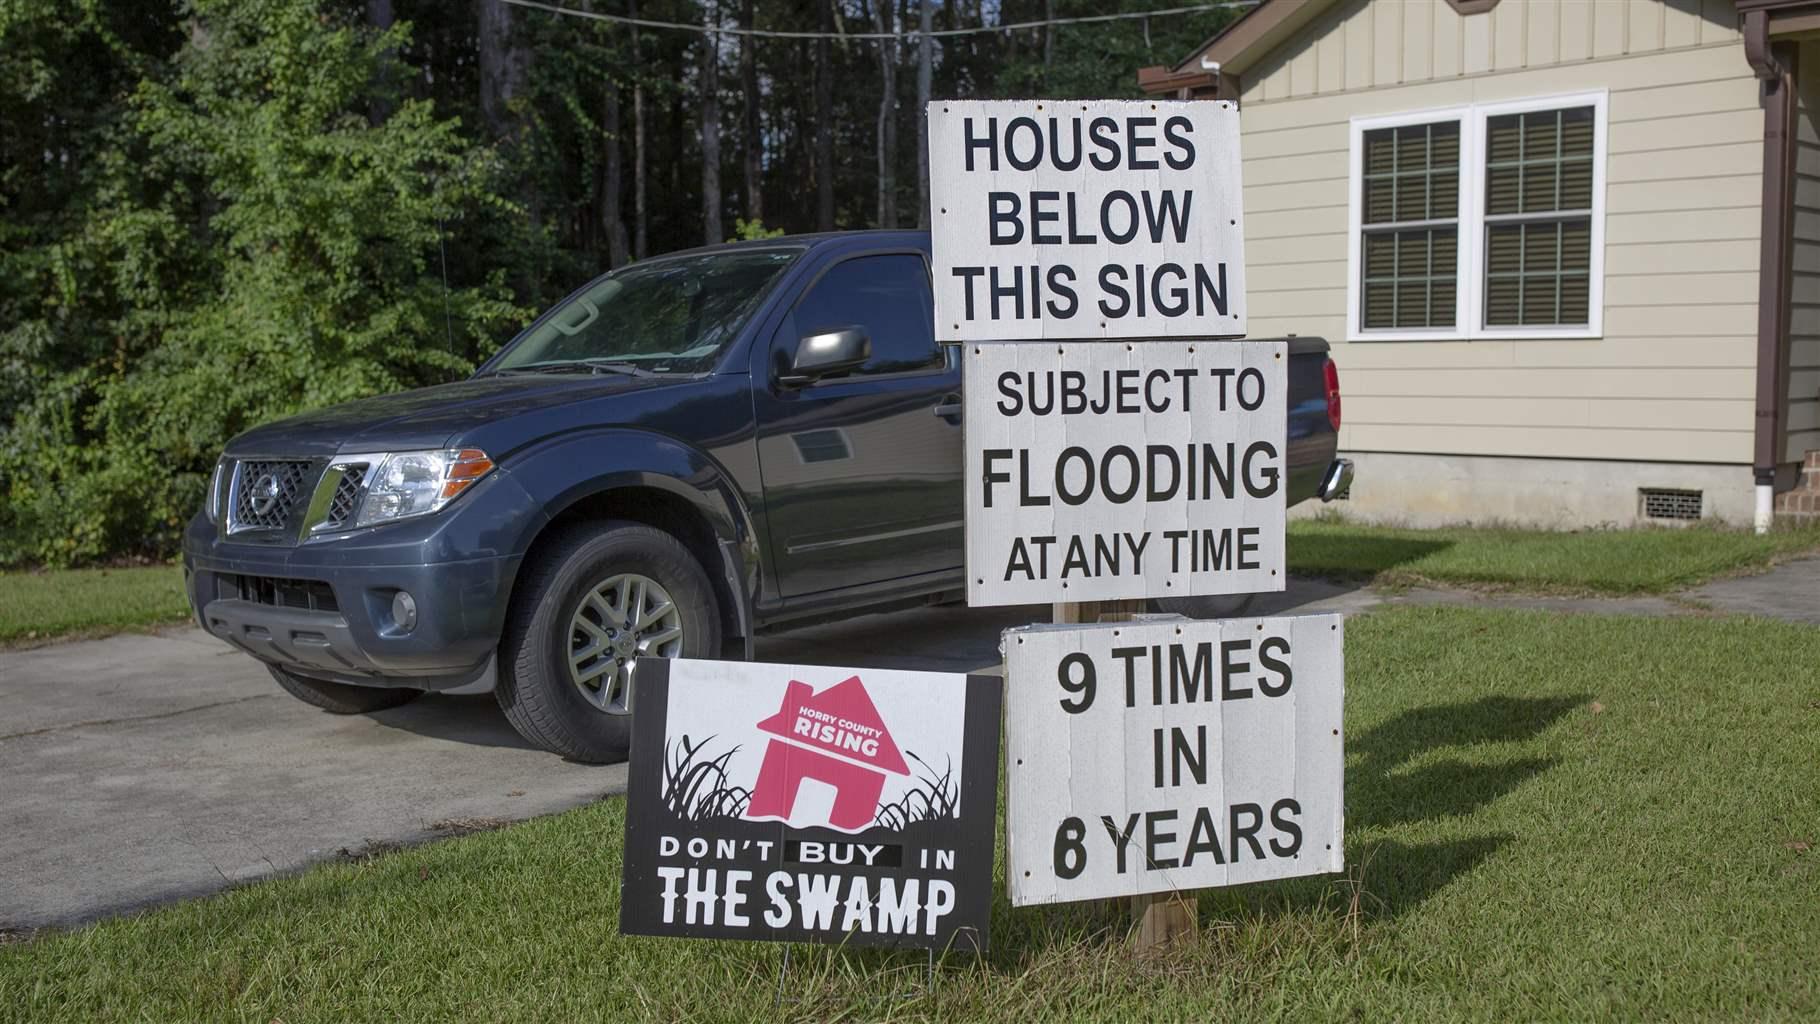 Four signs are staked into a lawn in front of a blue pickup truck and tan house. Three of the signs are stacked one on top of the other and read in bold black capital letters on white backgrounds: “Houses below this sign subject to flooding at any time. 9 times in 6 years.” To the left, the fourth sign shows an image of a tilted house sinking into a body of water surrounded by tall grasses and reads: “Horry County Rising. Don’t buy in the swamp.” 